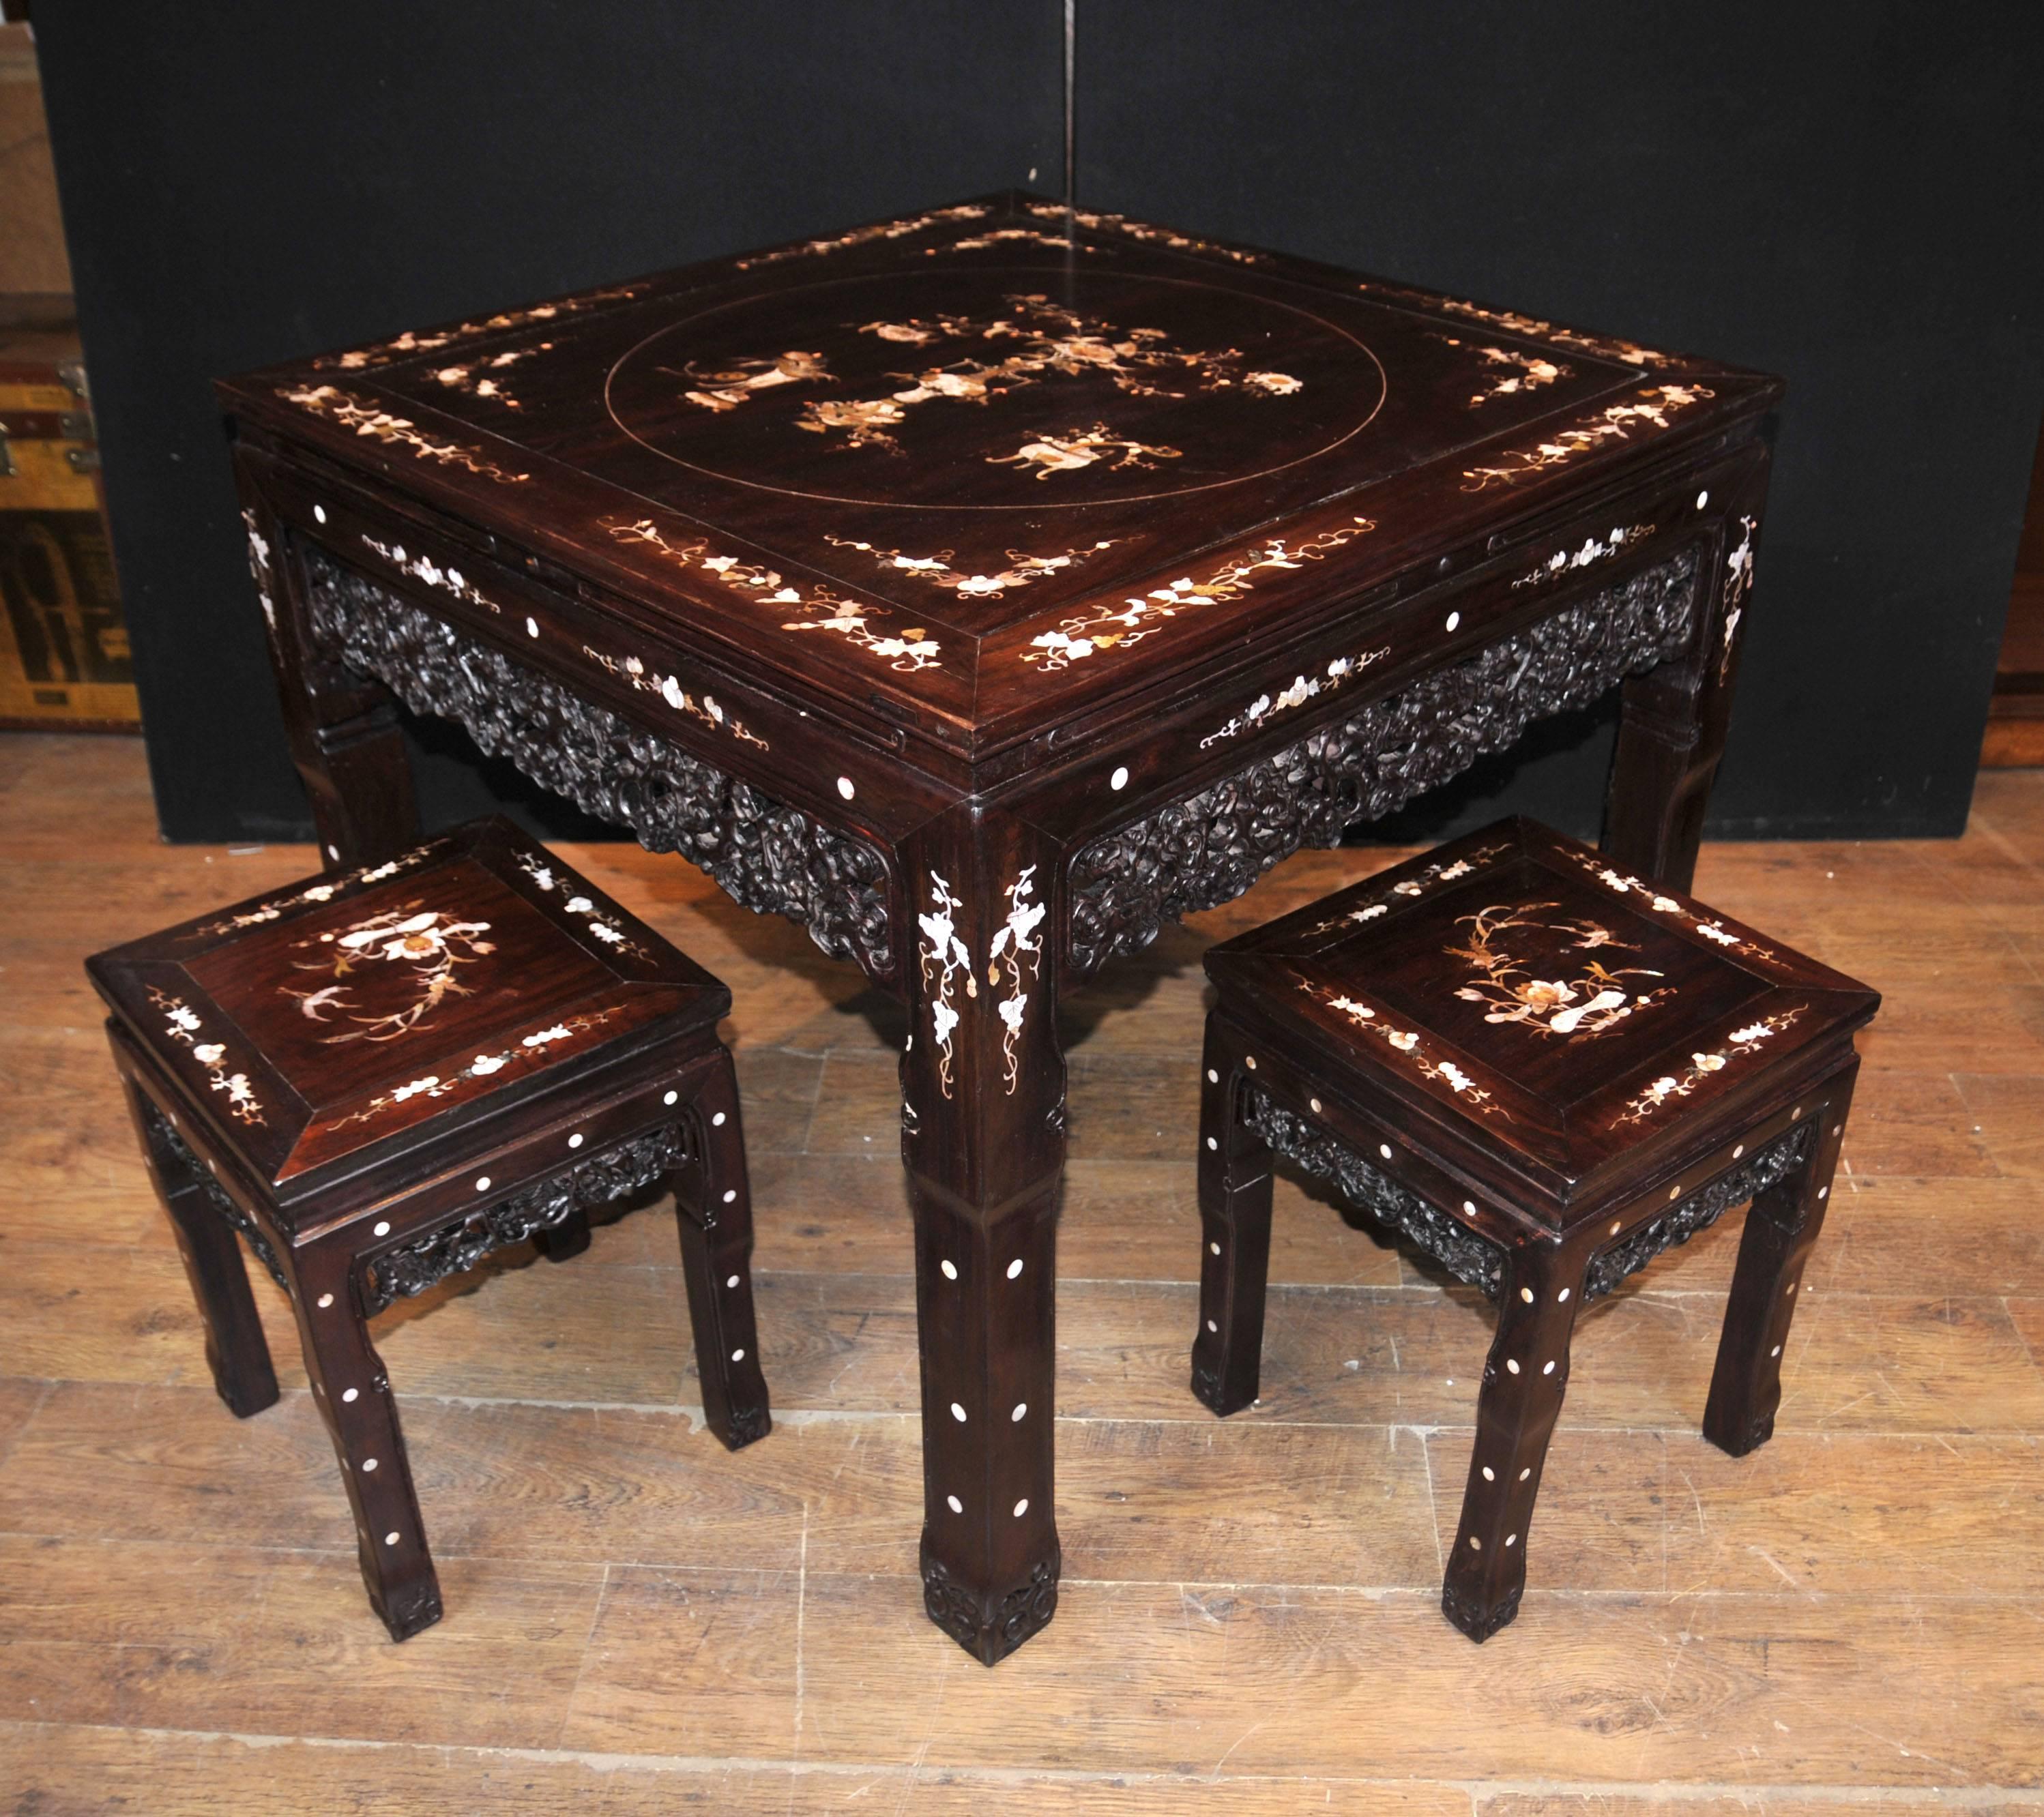 Chinese Antique Hardwood Table and Stool Dining Set Mother-of-Pearl Inlay 1